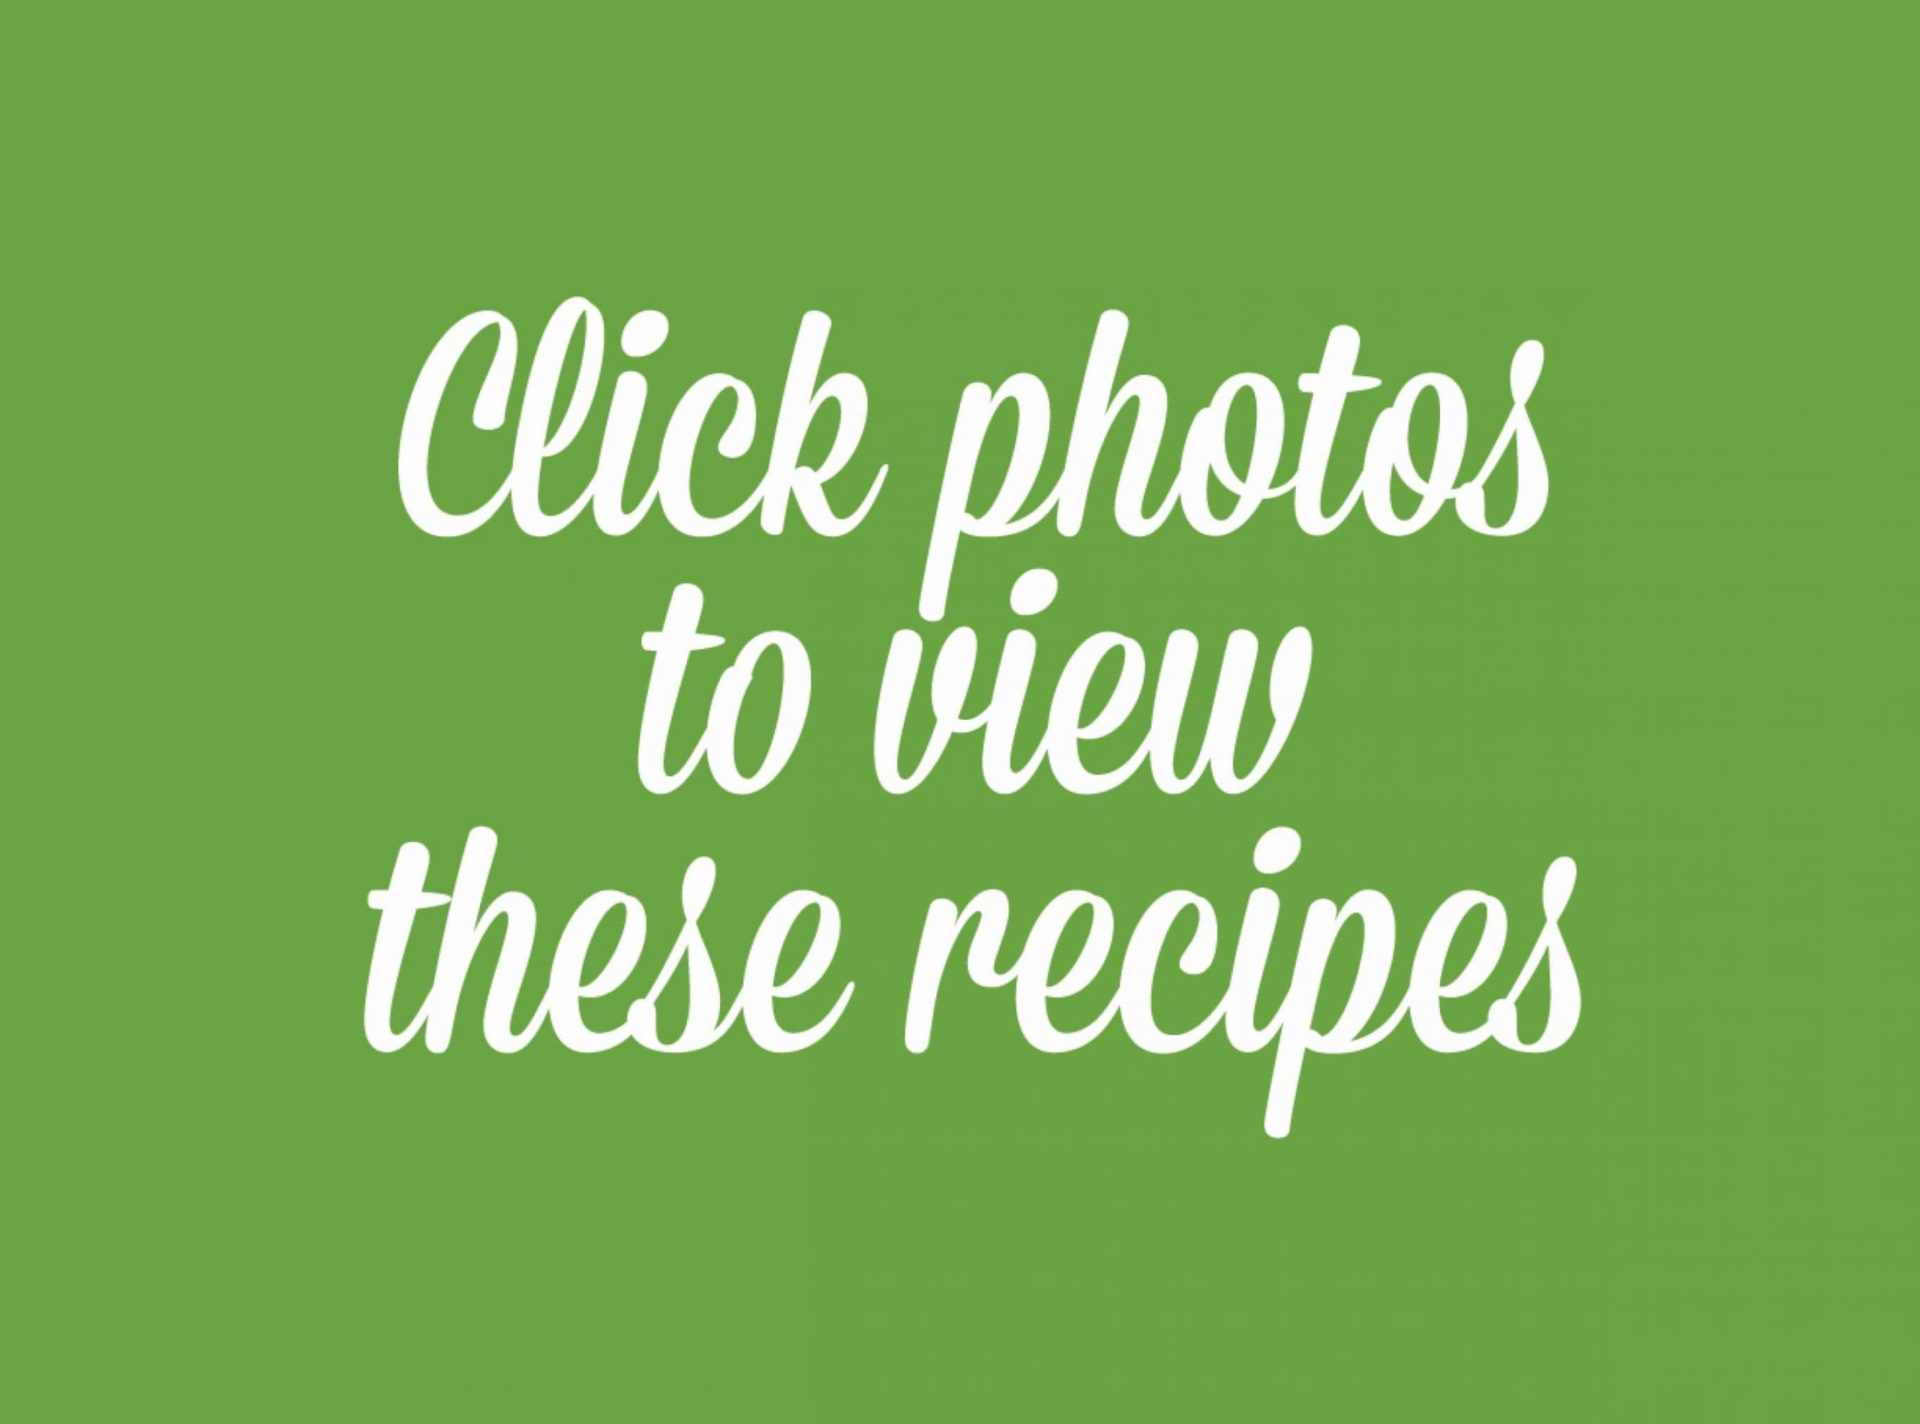 Click photos to view these recipes